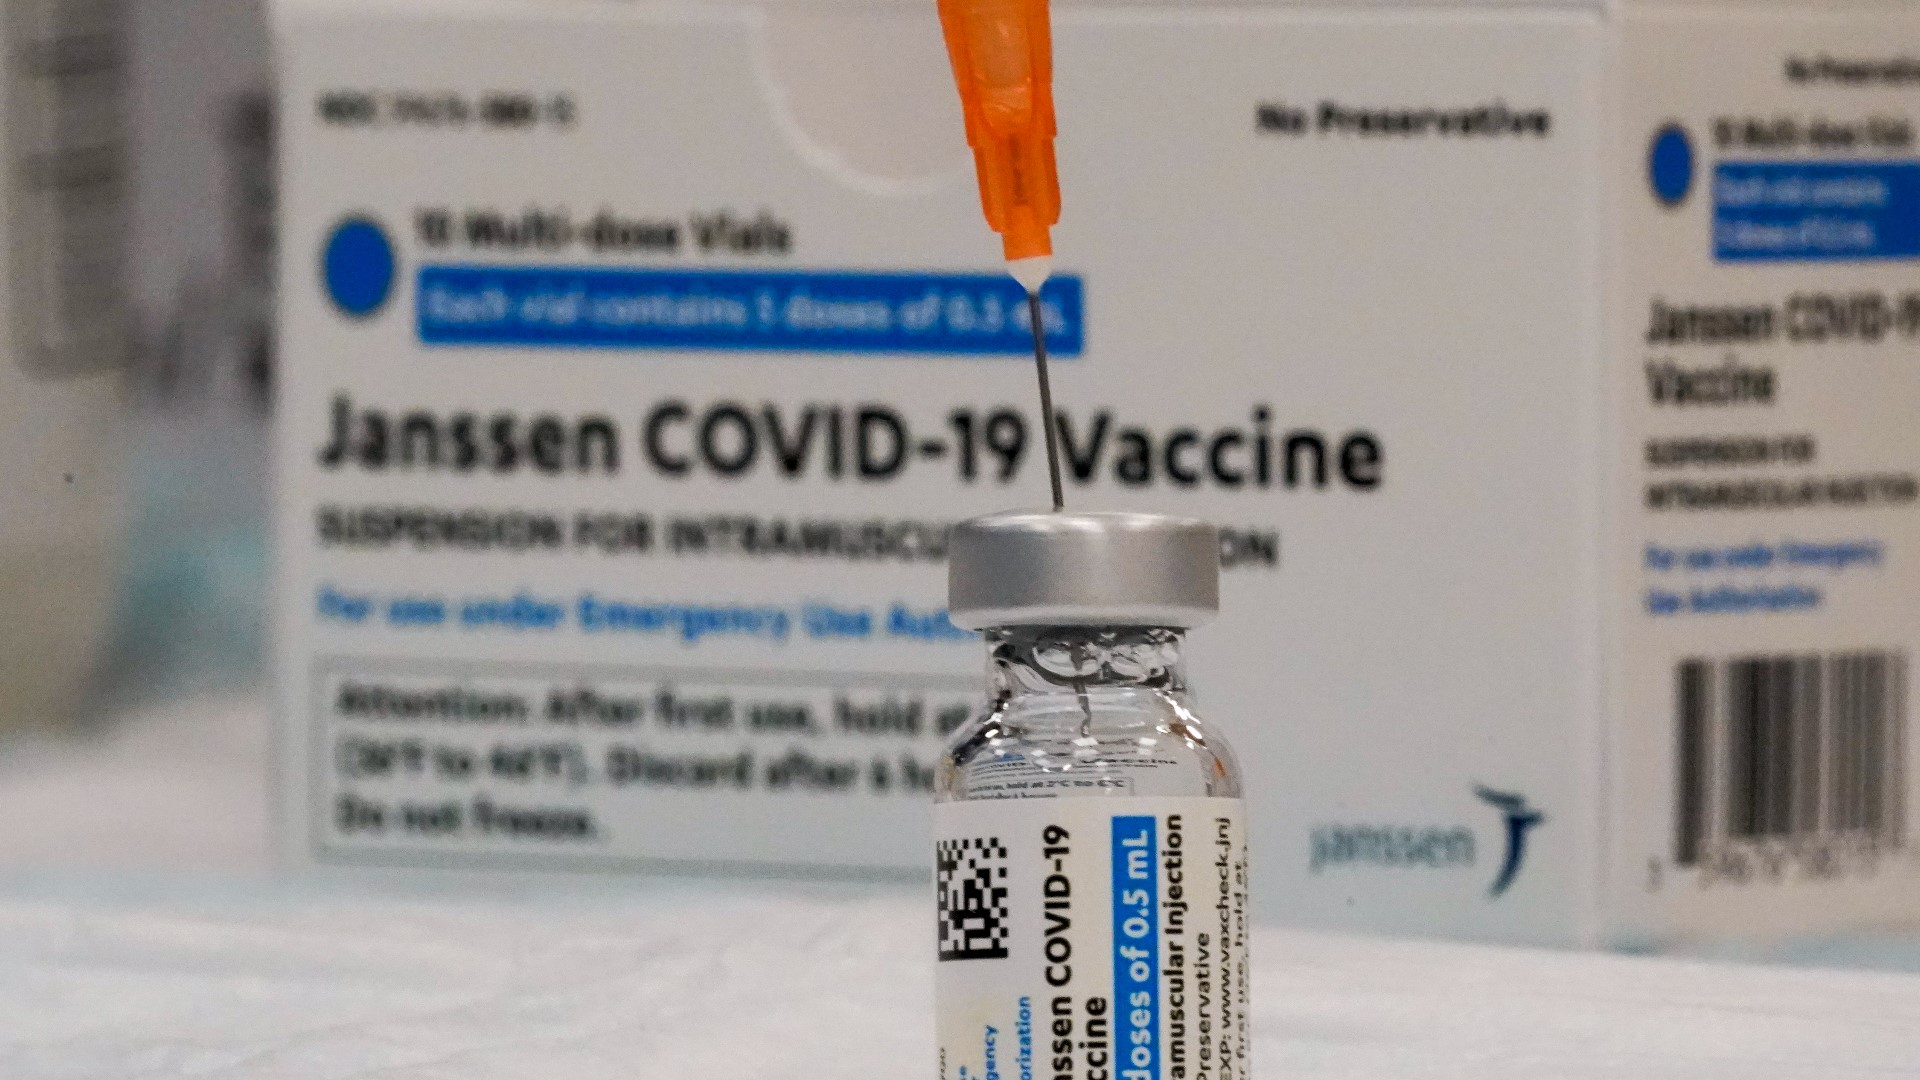 The state’s pressing all COVID-19 vaccine providers to act urgently and try everything they can to use as many of those doses as possible.